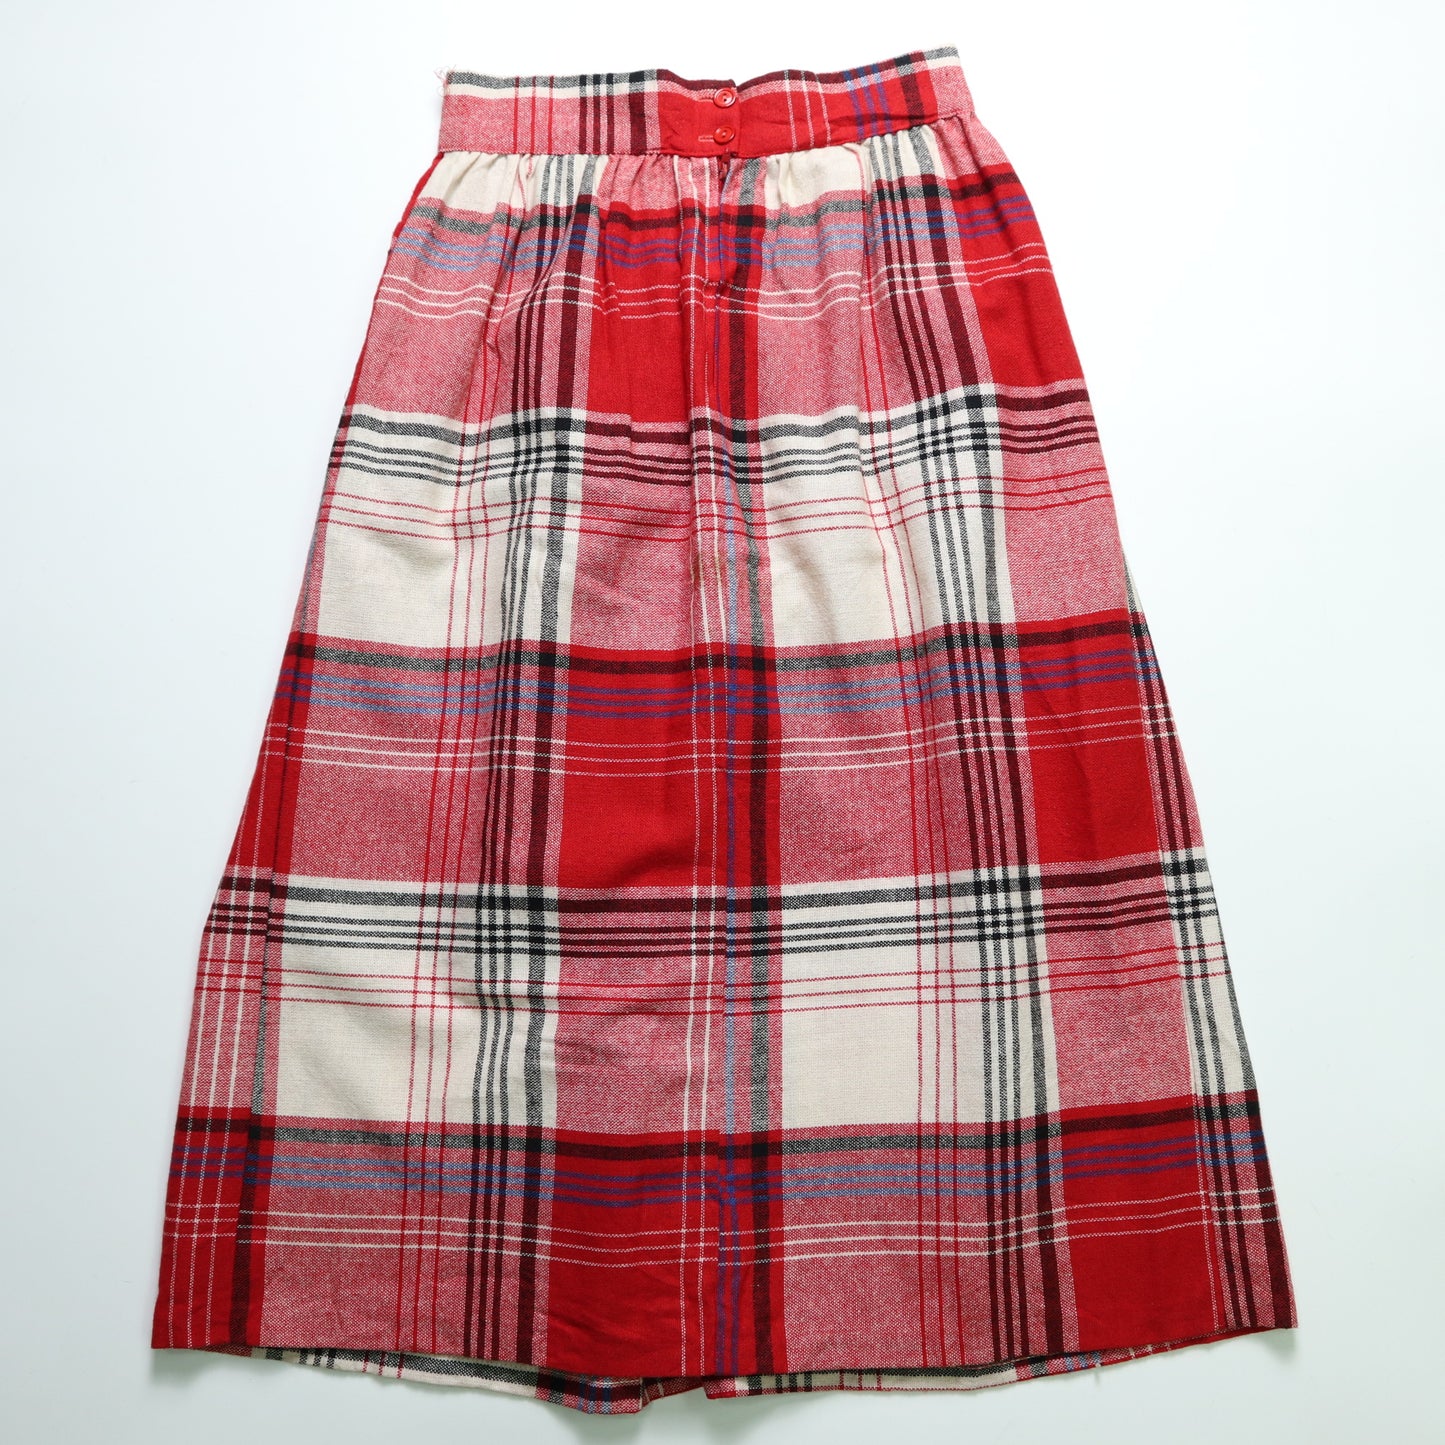 1980s Made in America American Red and White Plaid Wool Skirt Vintage Wool Skirt